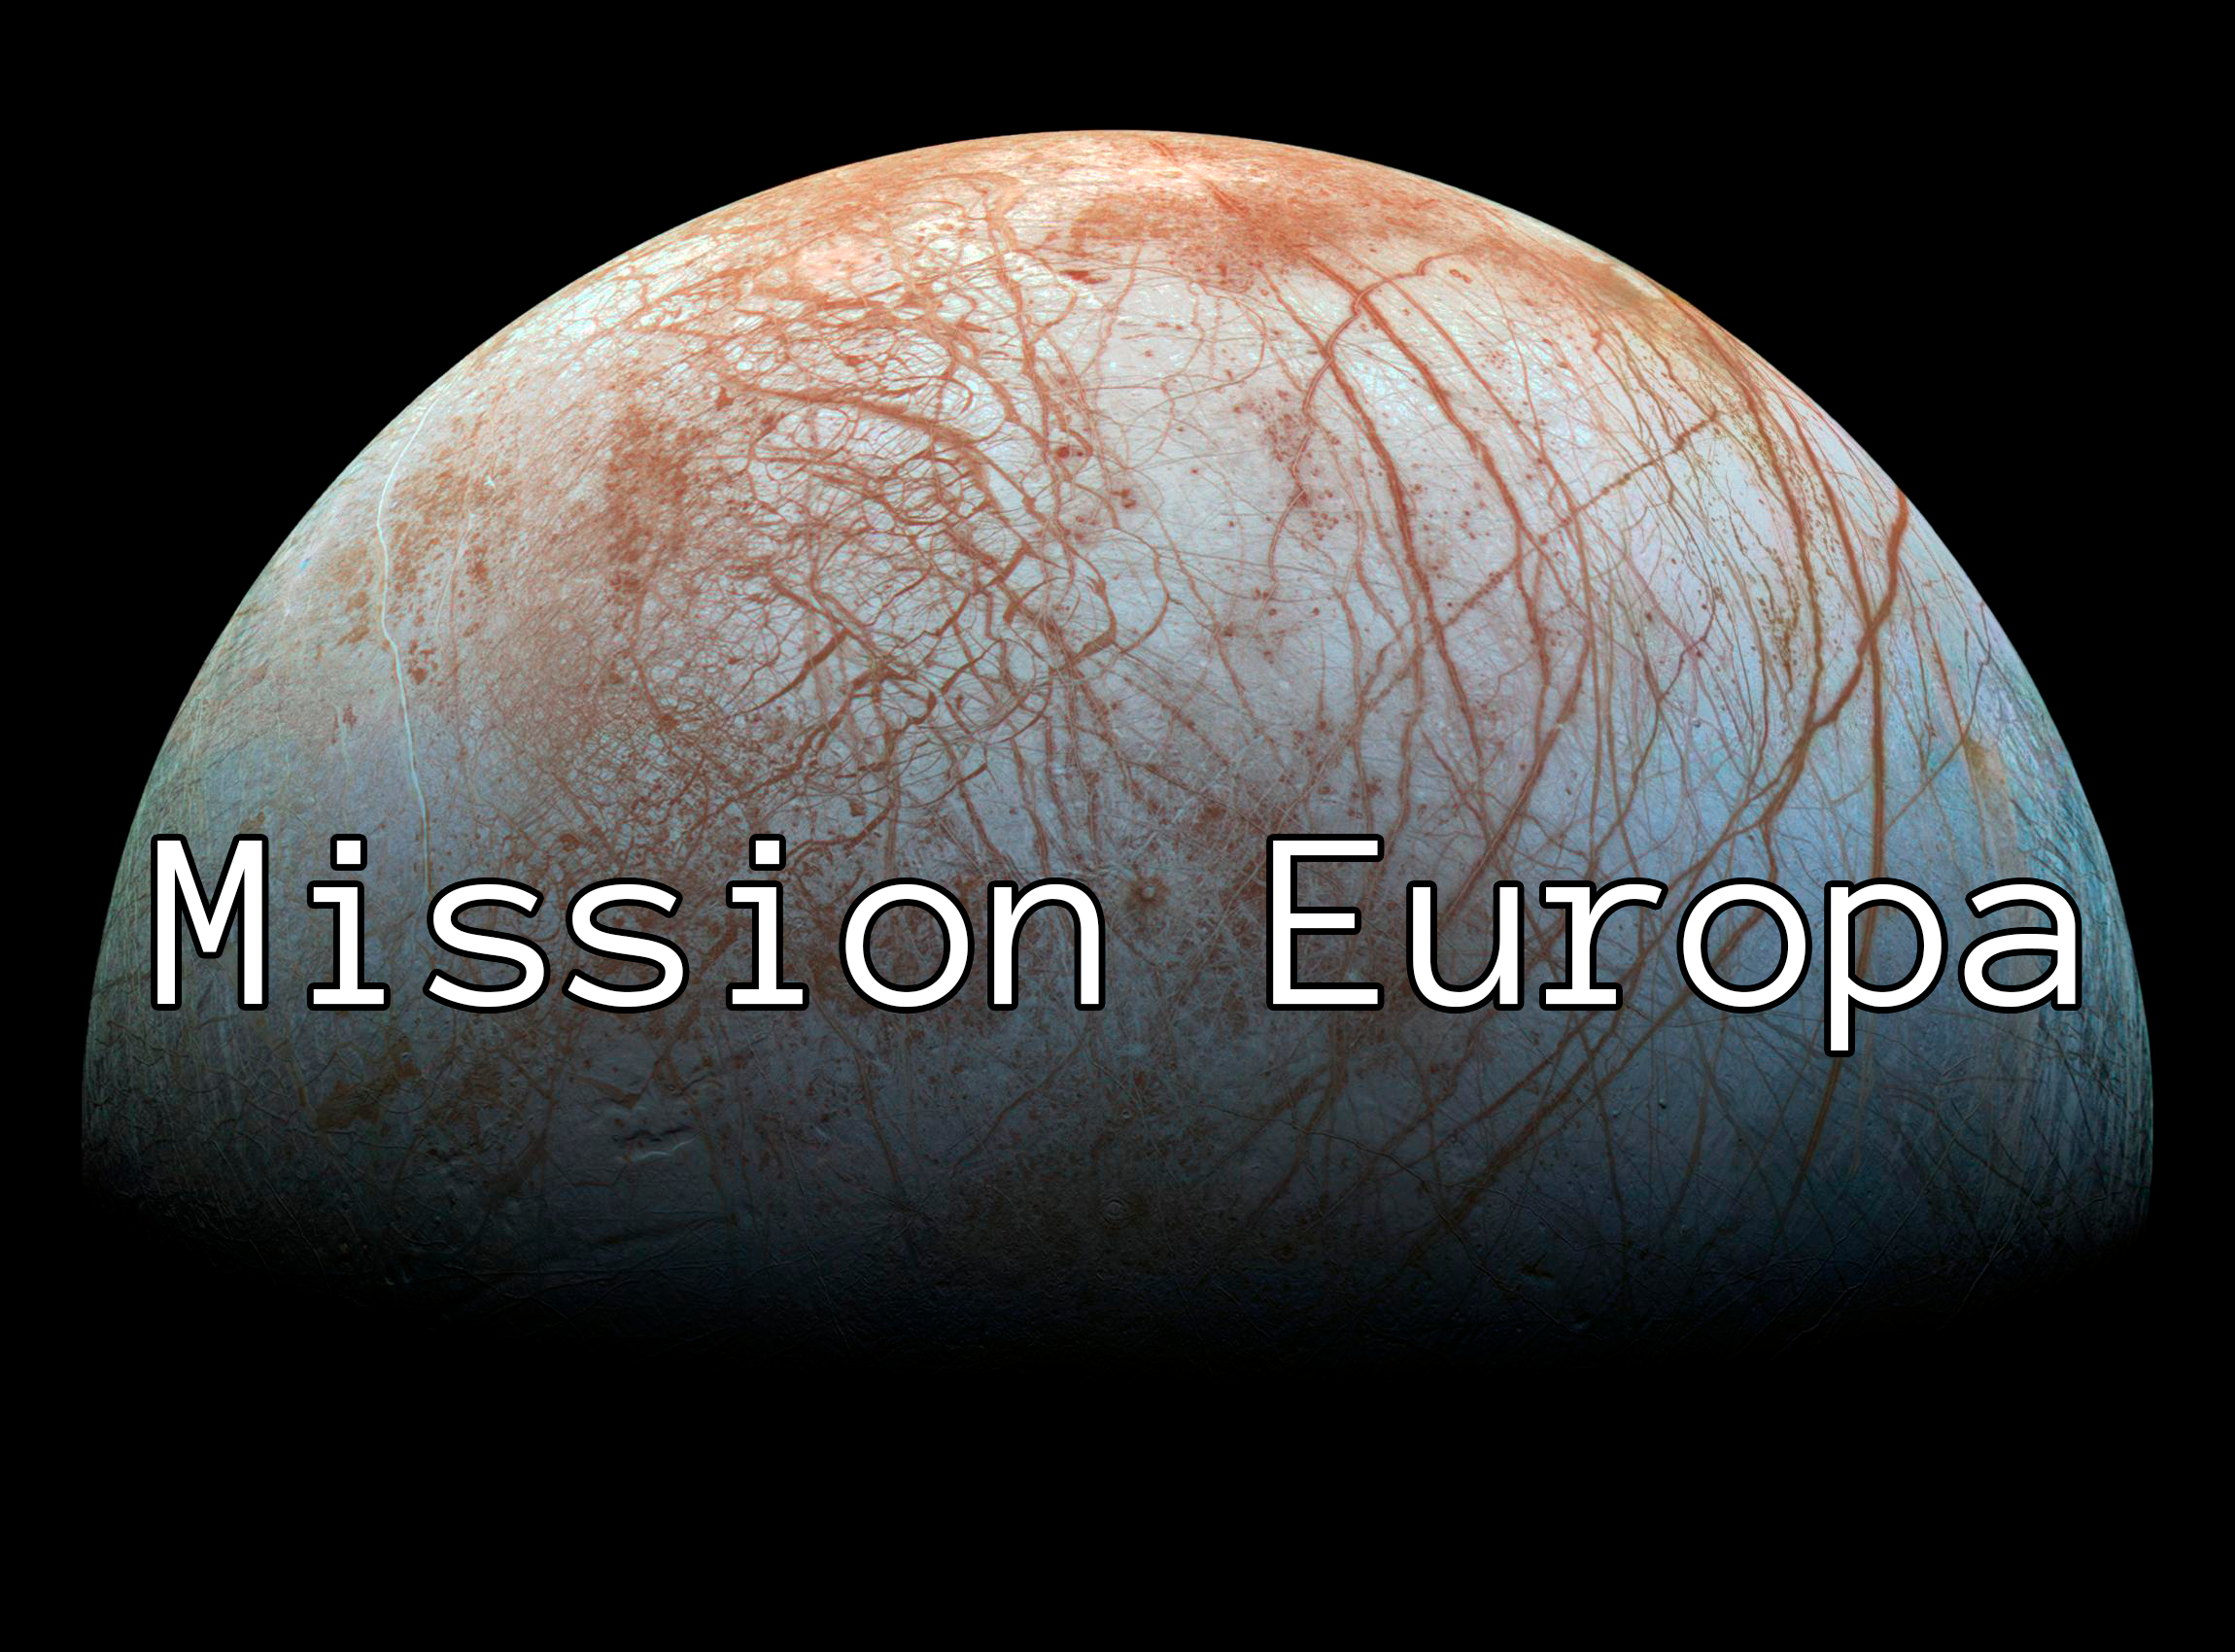 Mission Europa